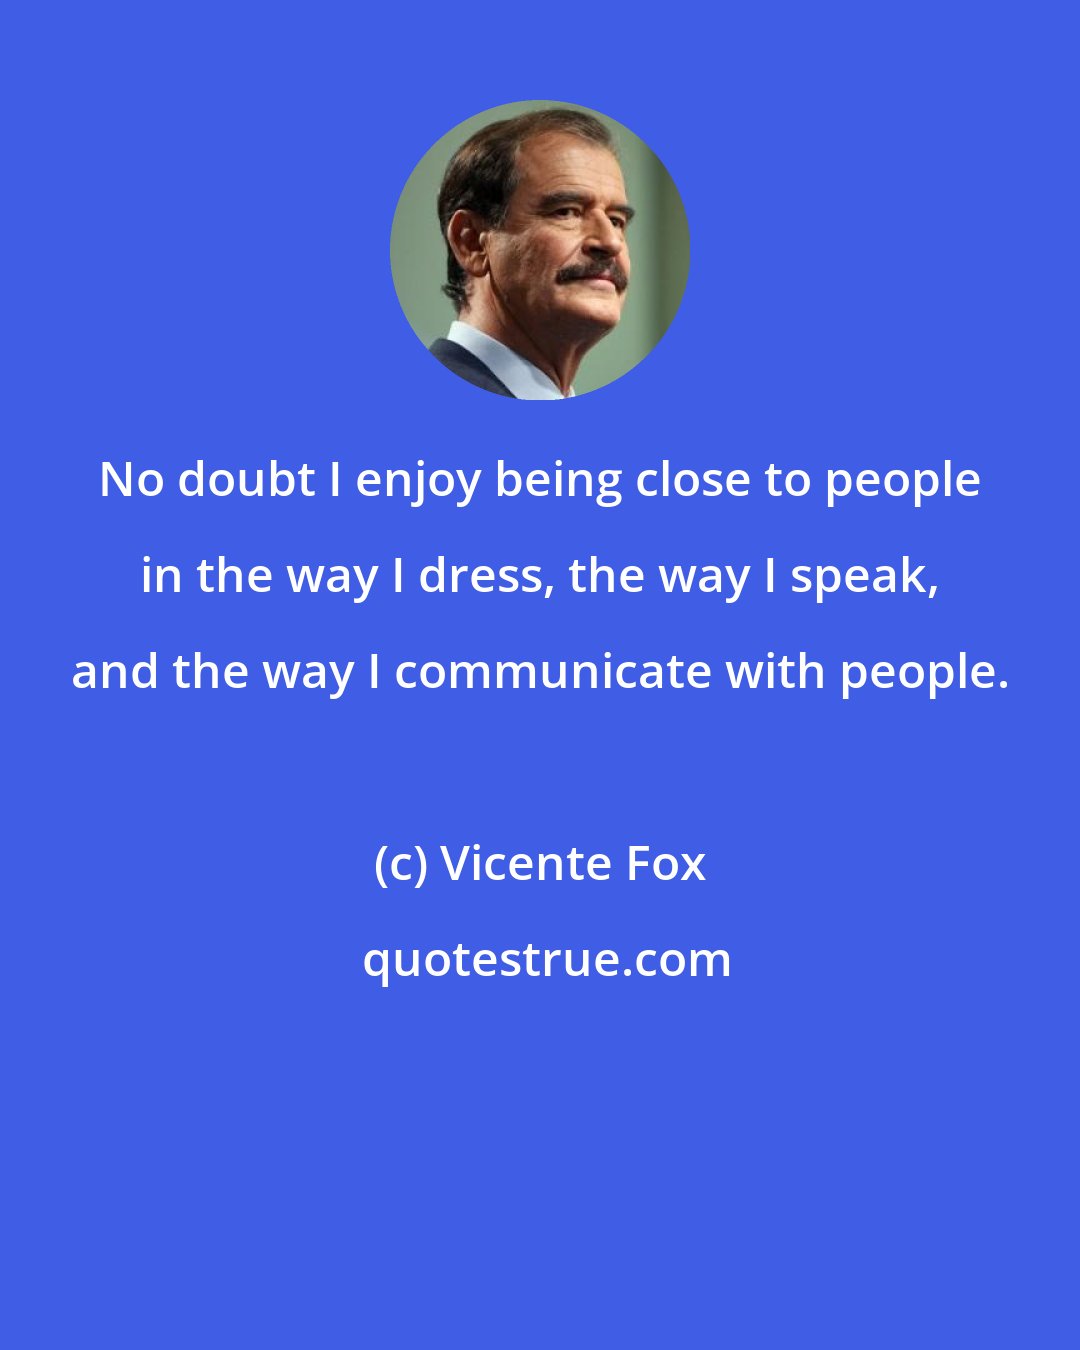 Vicente Fox: No doubt I enjoy being close to people in the way I dress, the way I speak, and the way I communicate with people.